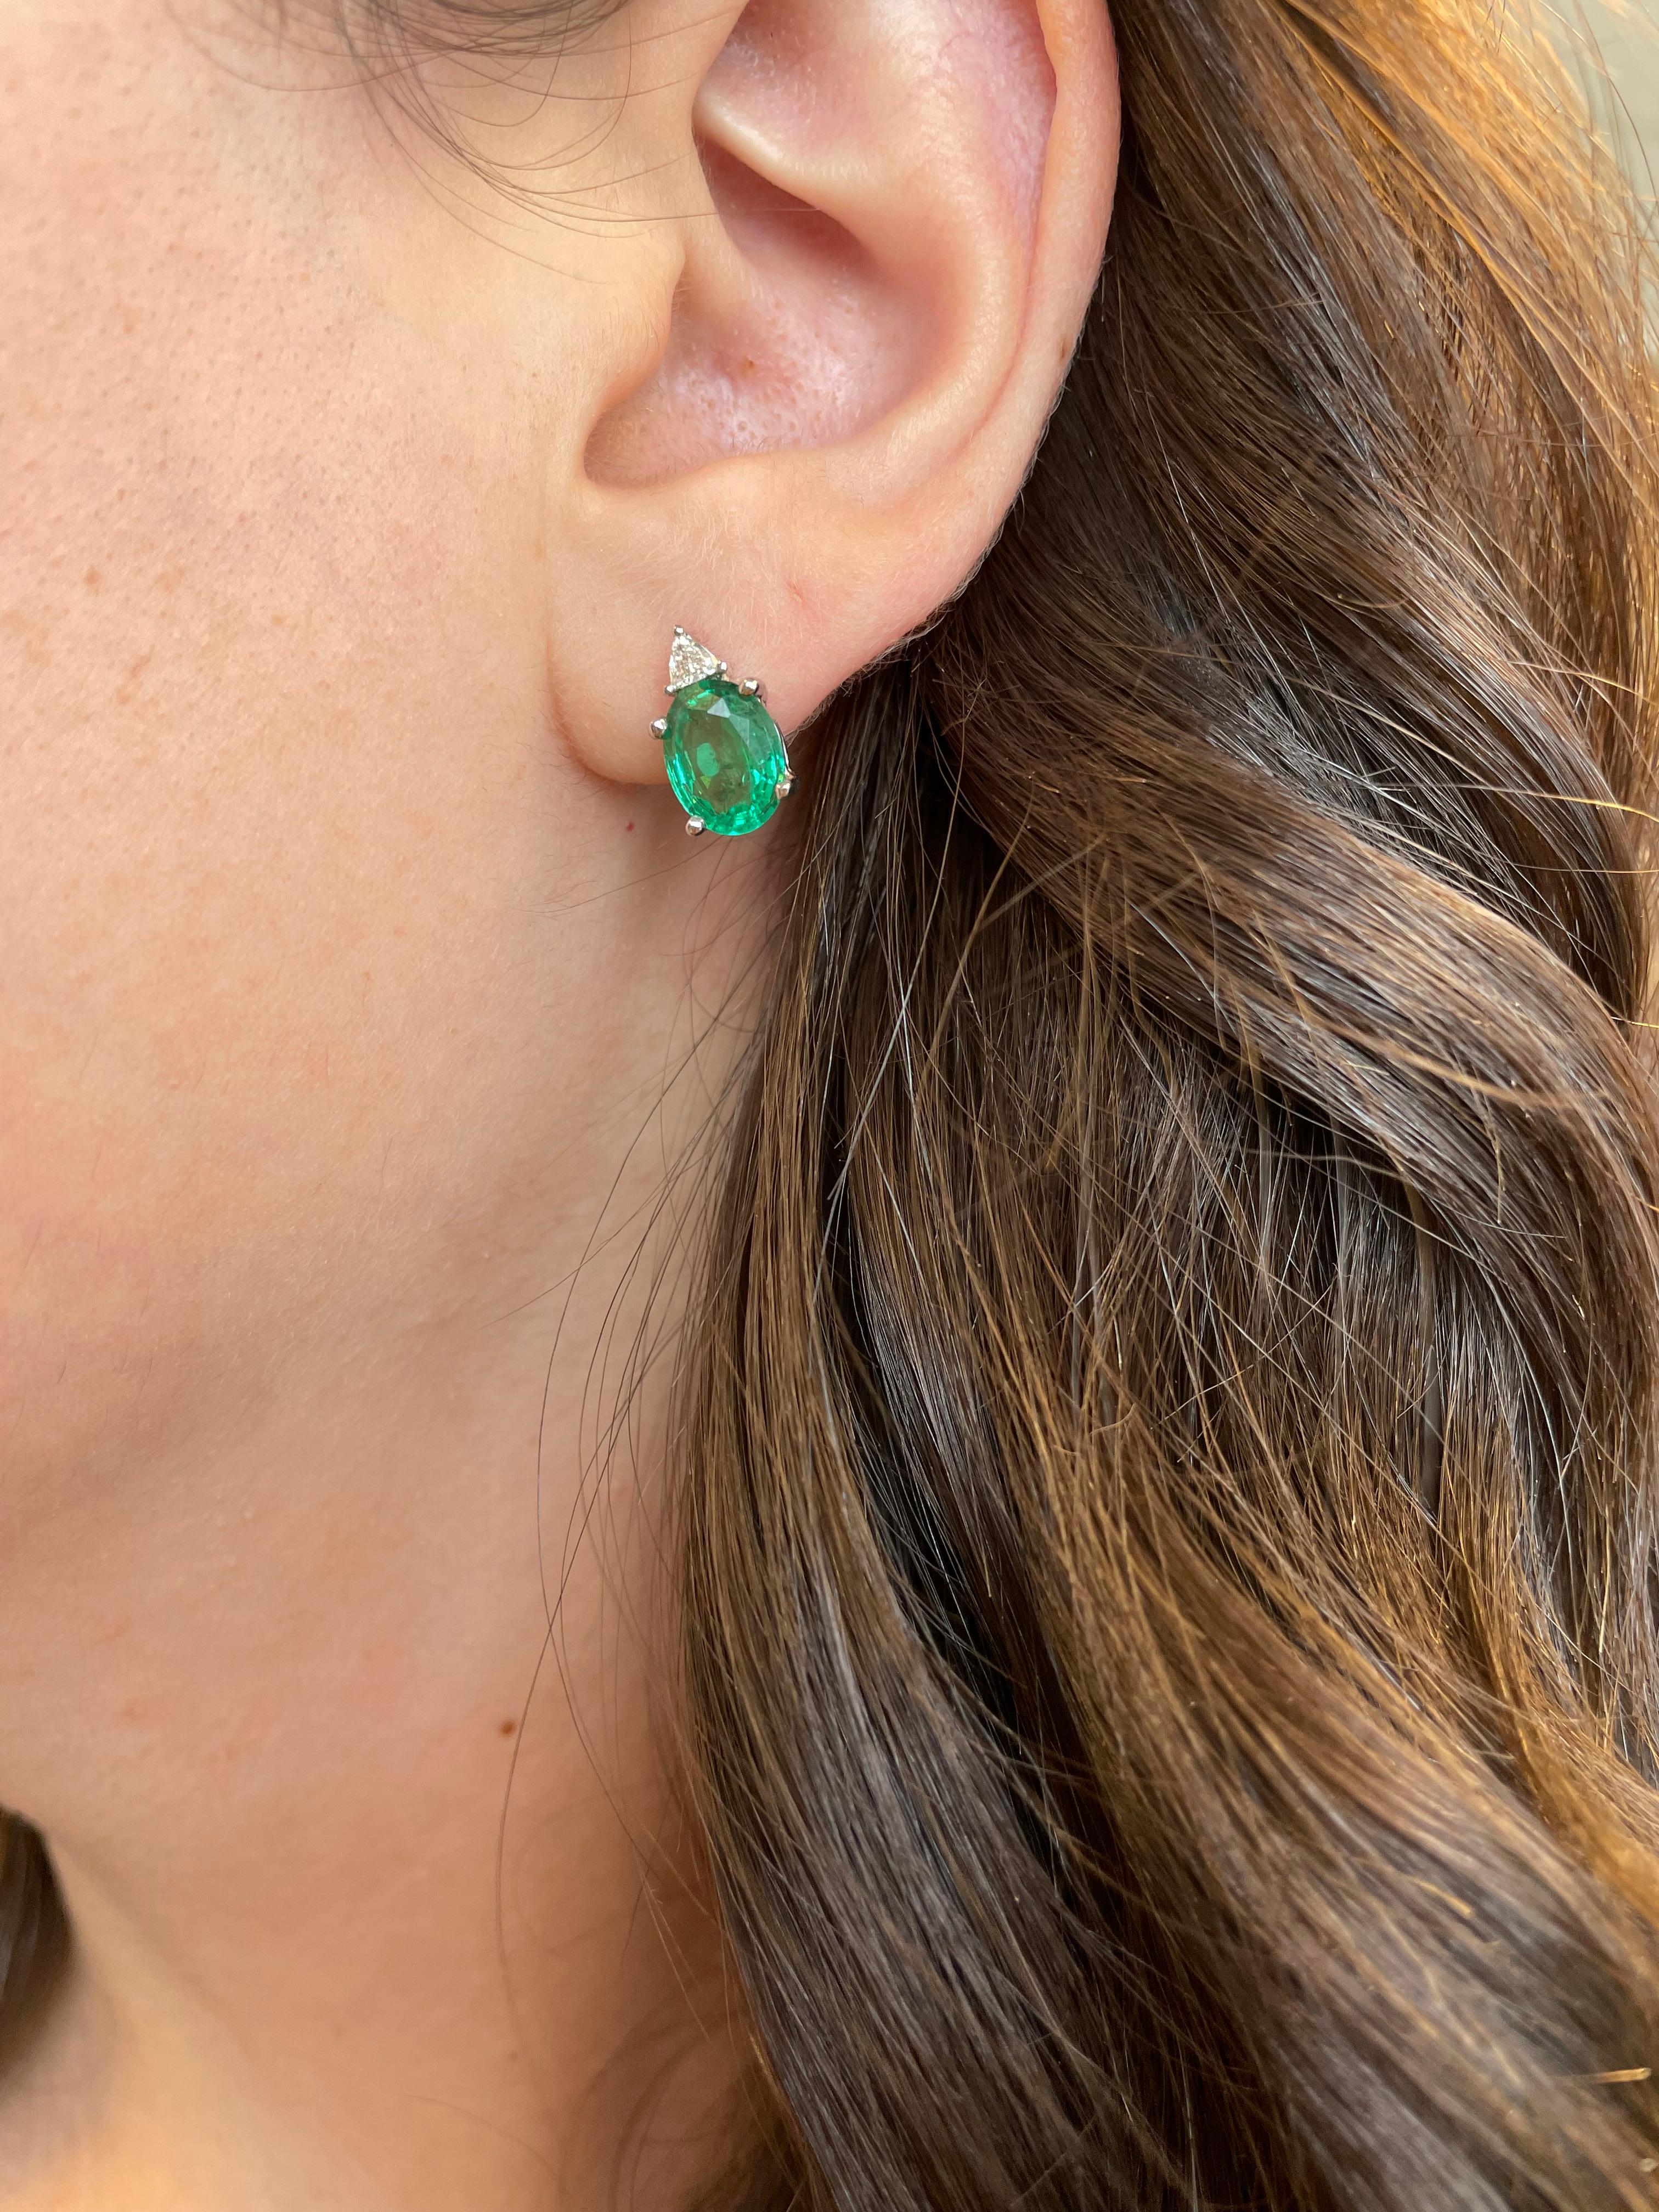 Simple yet modern emeralds with diamonds earrings.
3.15 carats total gemstone weight.
3.02 carat oval emeralds, apx F2. 0.13 carats of trilliant cut diamonds, approximately G/H color and SI clarity. 18-karat white gold.
Ask us about the matching